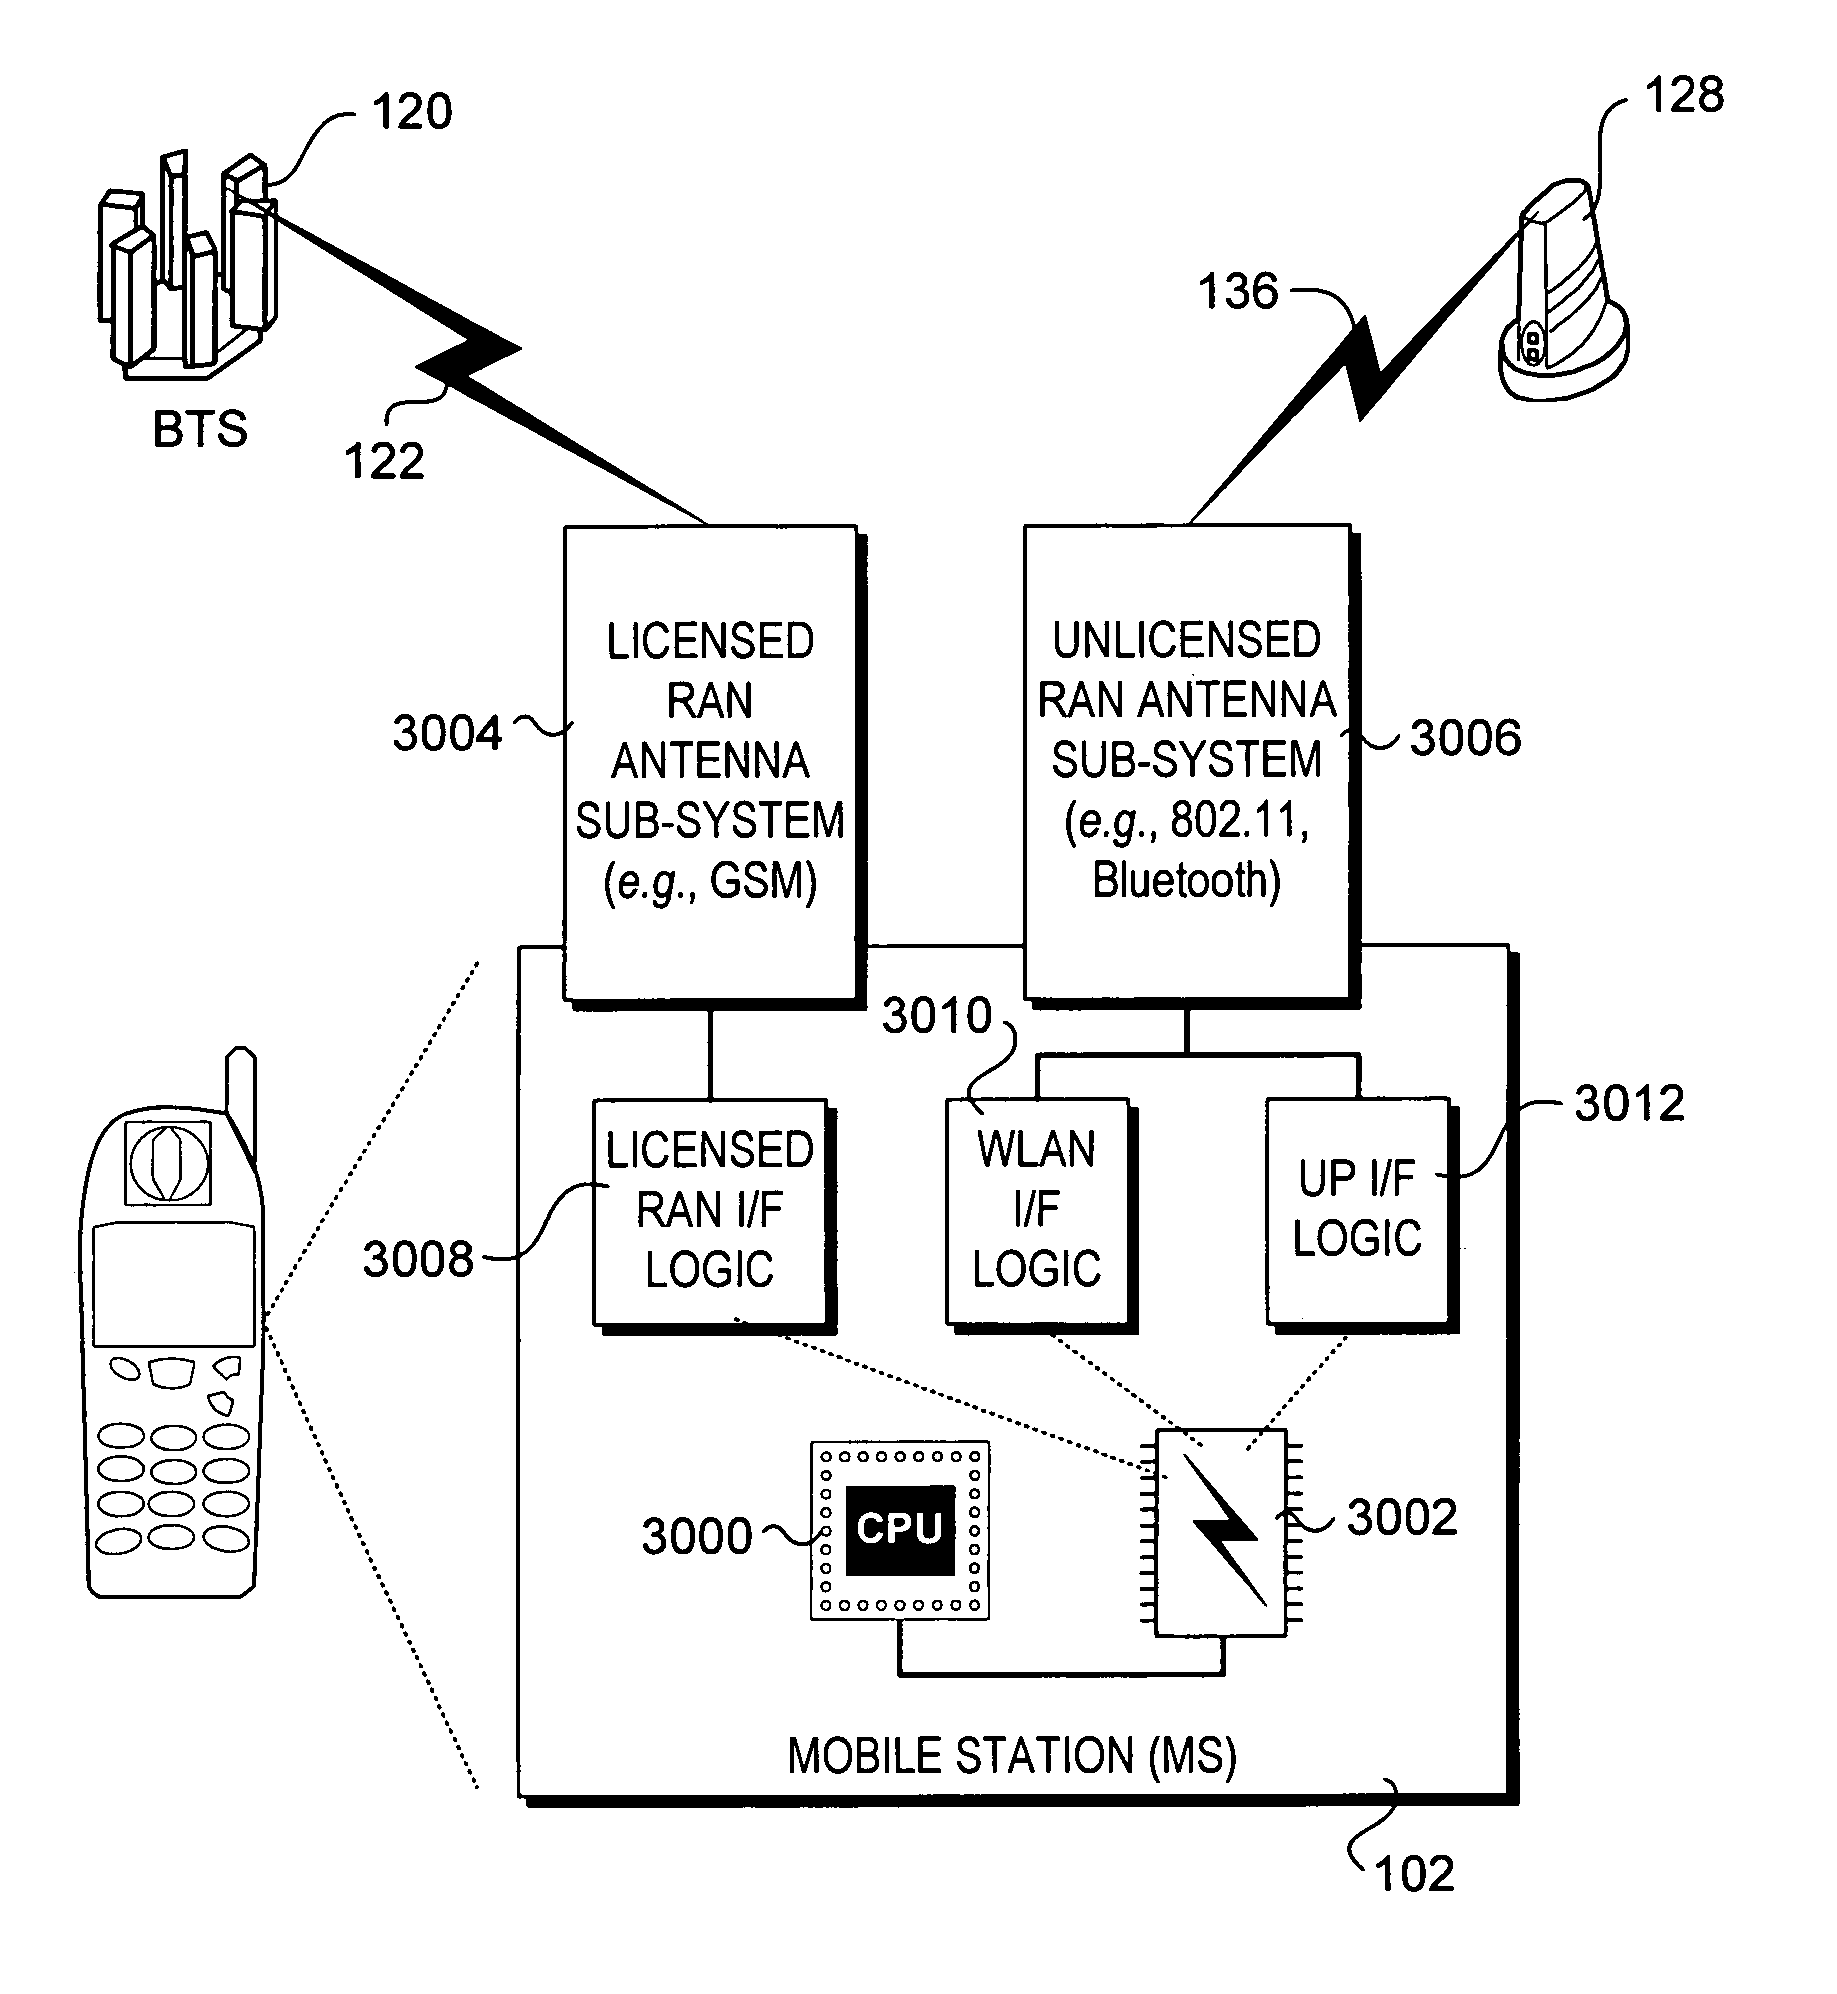 Apparatus and messages for interworking between unlicensed access network and GPRS network for data services